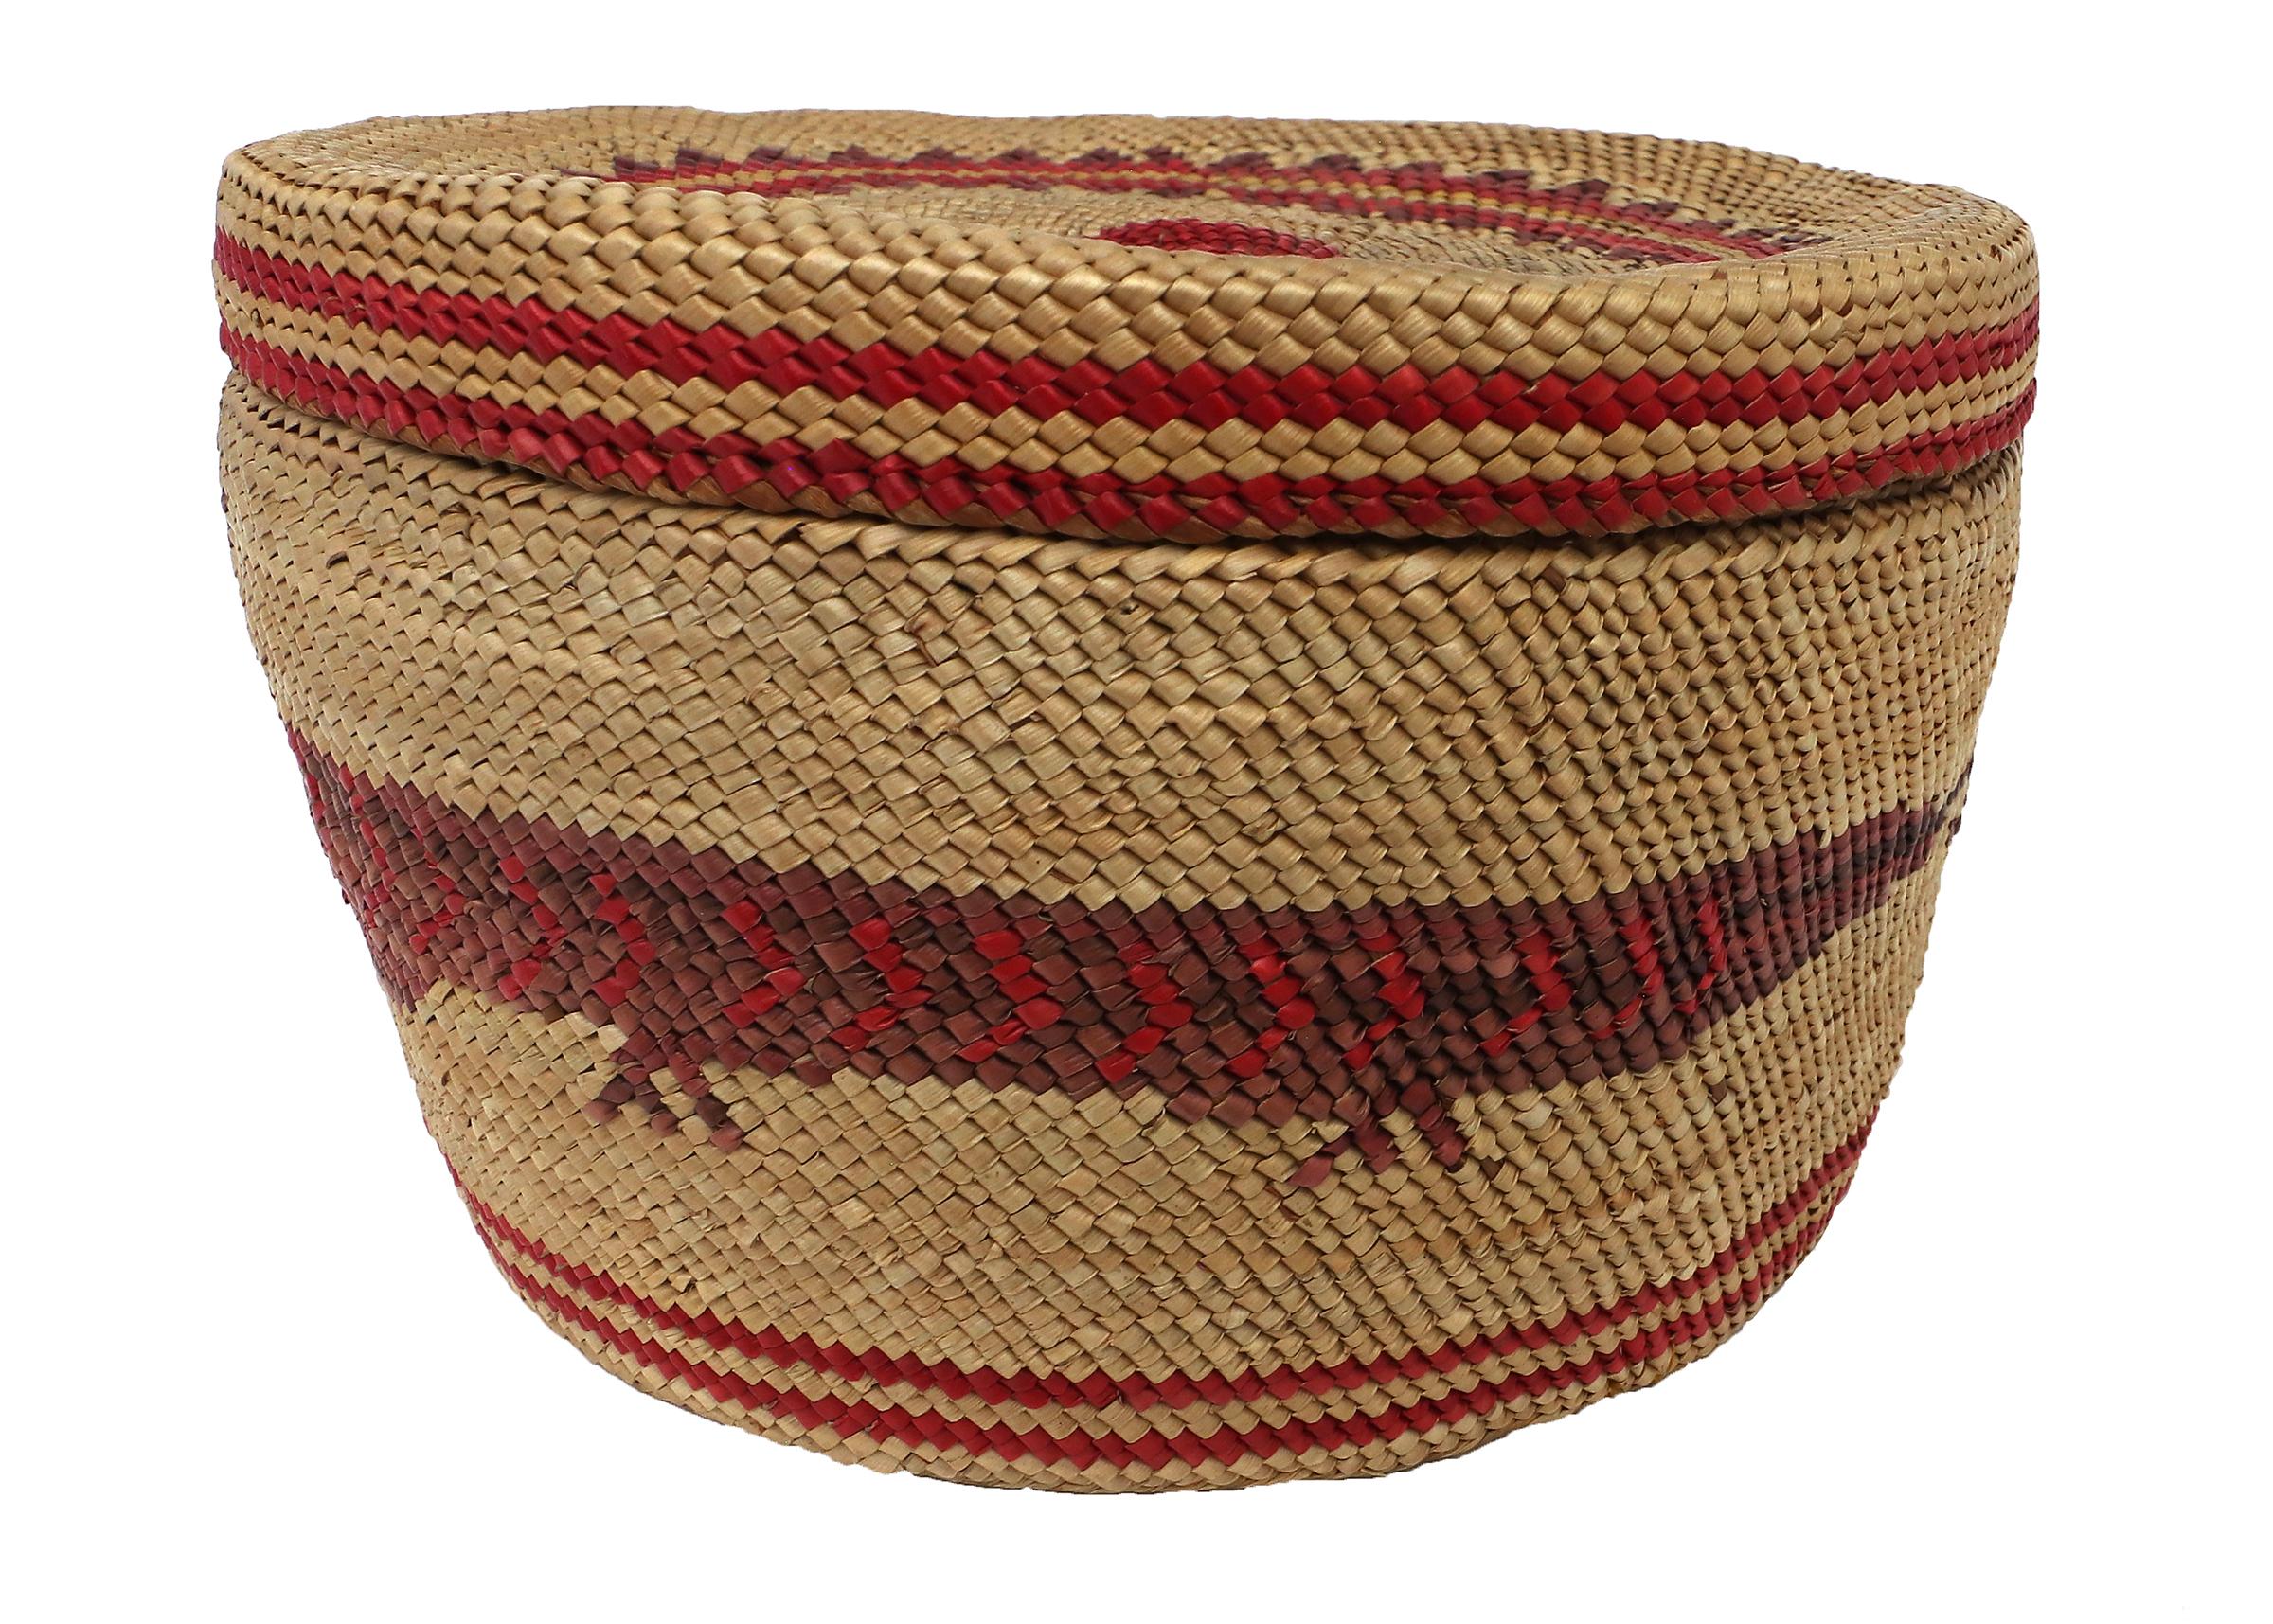 Nootka Northwest Coast 1900 Woven Basket with Top, Red and Black Designs For Sale 5